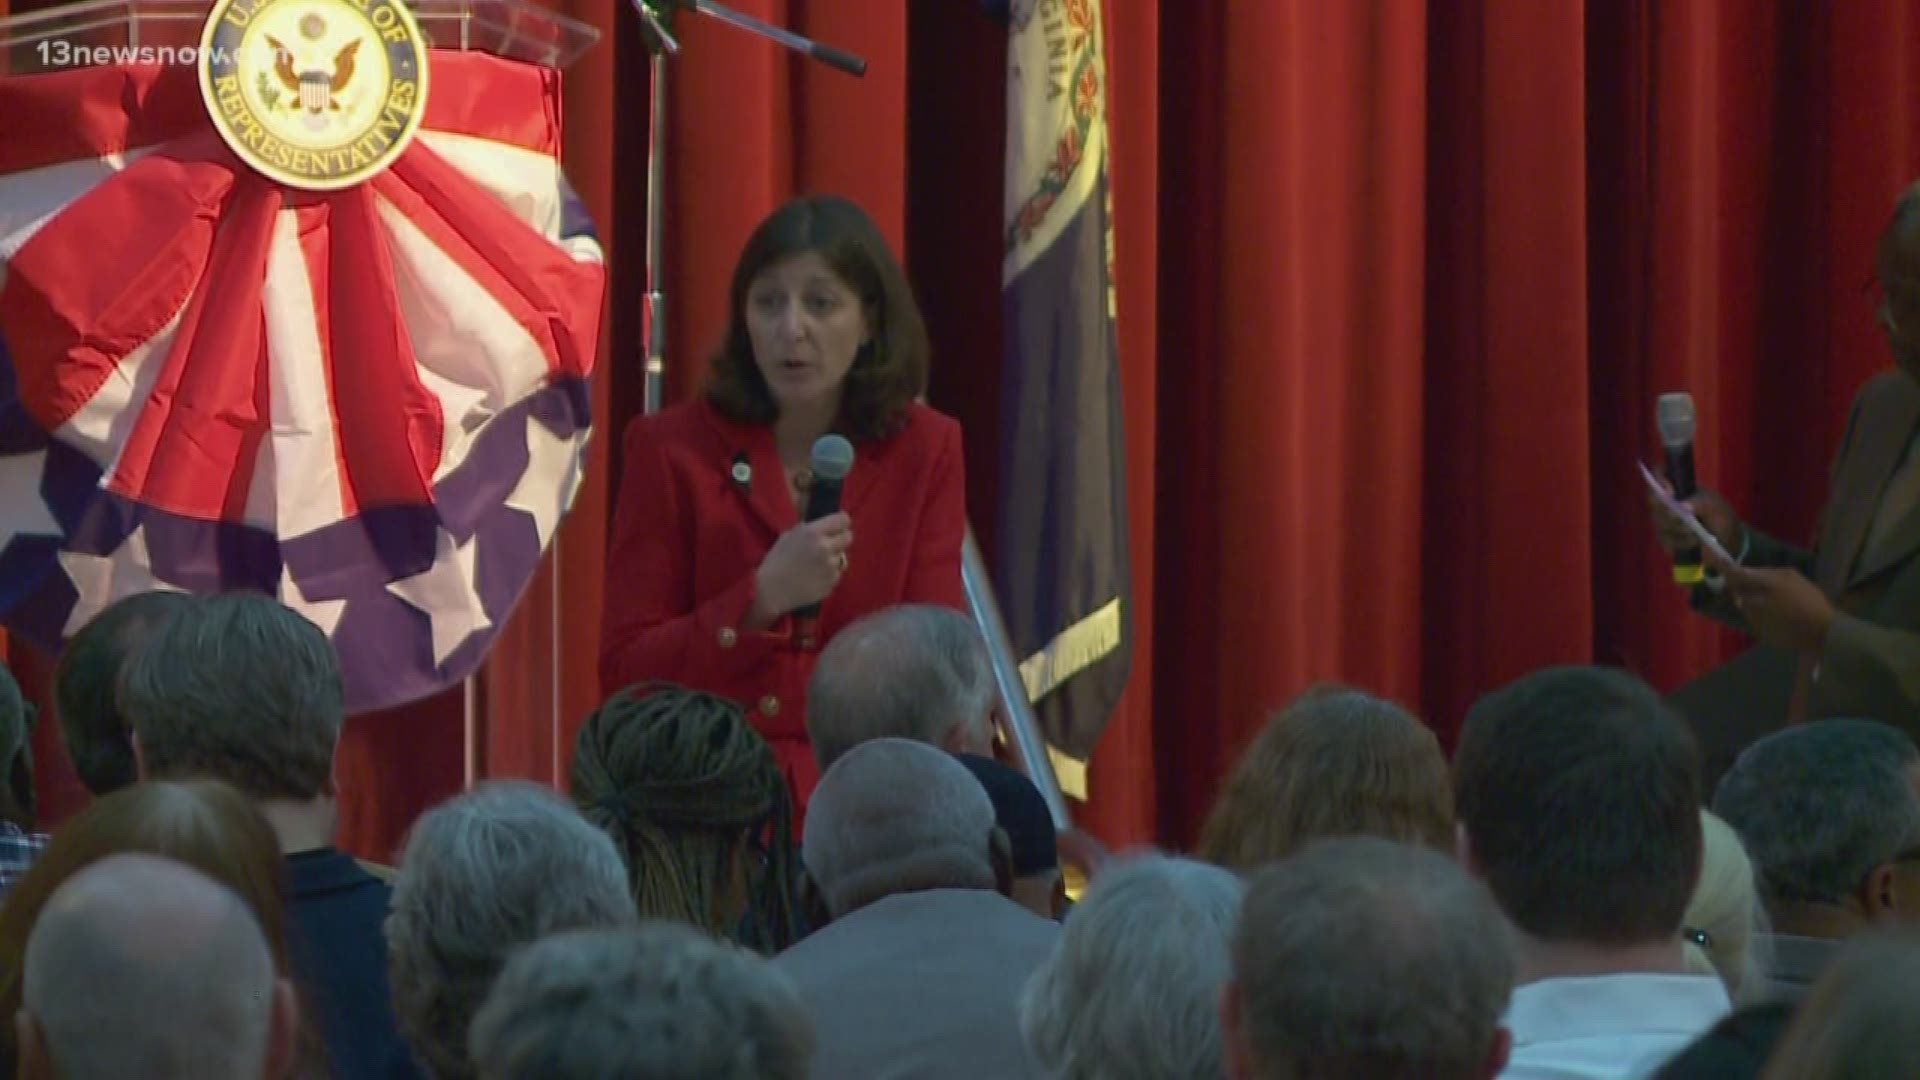 Rep. Elaine Luria held a town hall explaining her stance on impeachment. At the same time, at the same place, the Trump campaign held an anti-impeachment event.